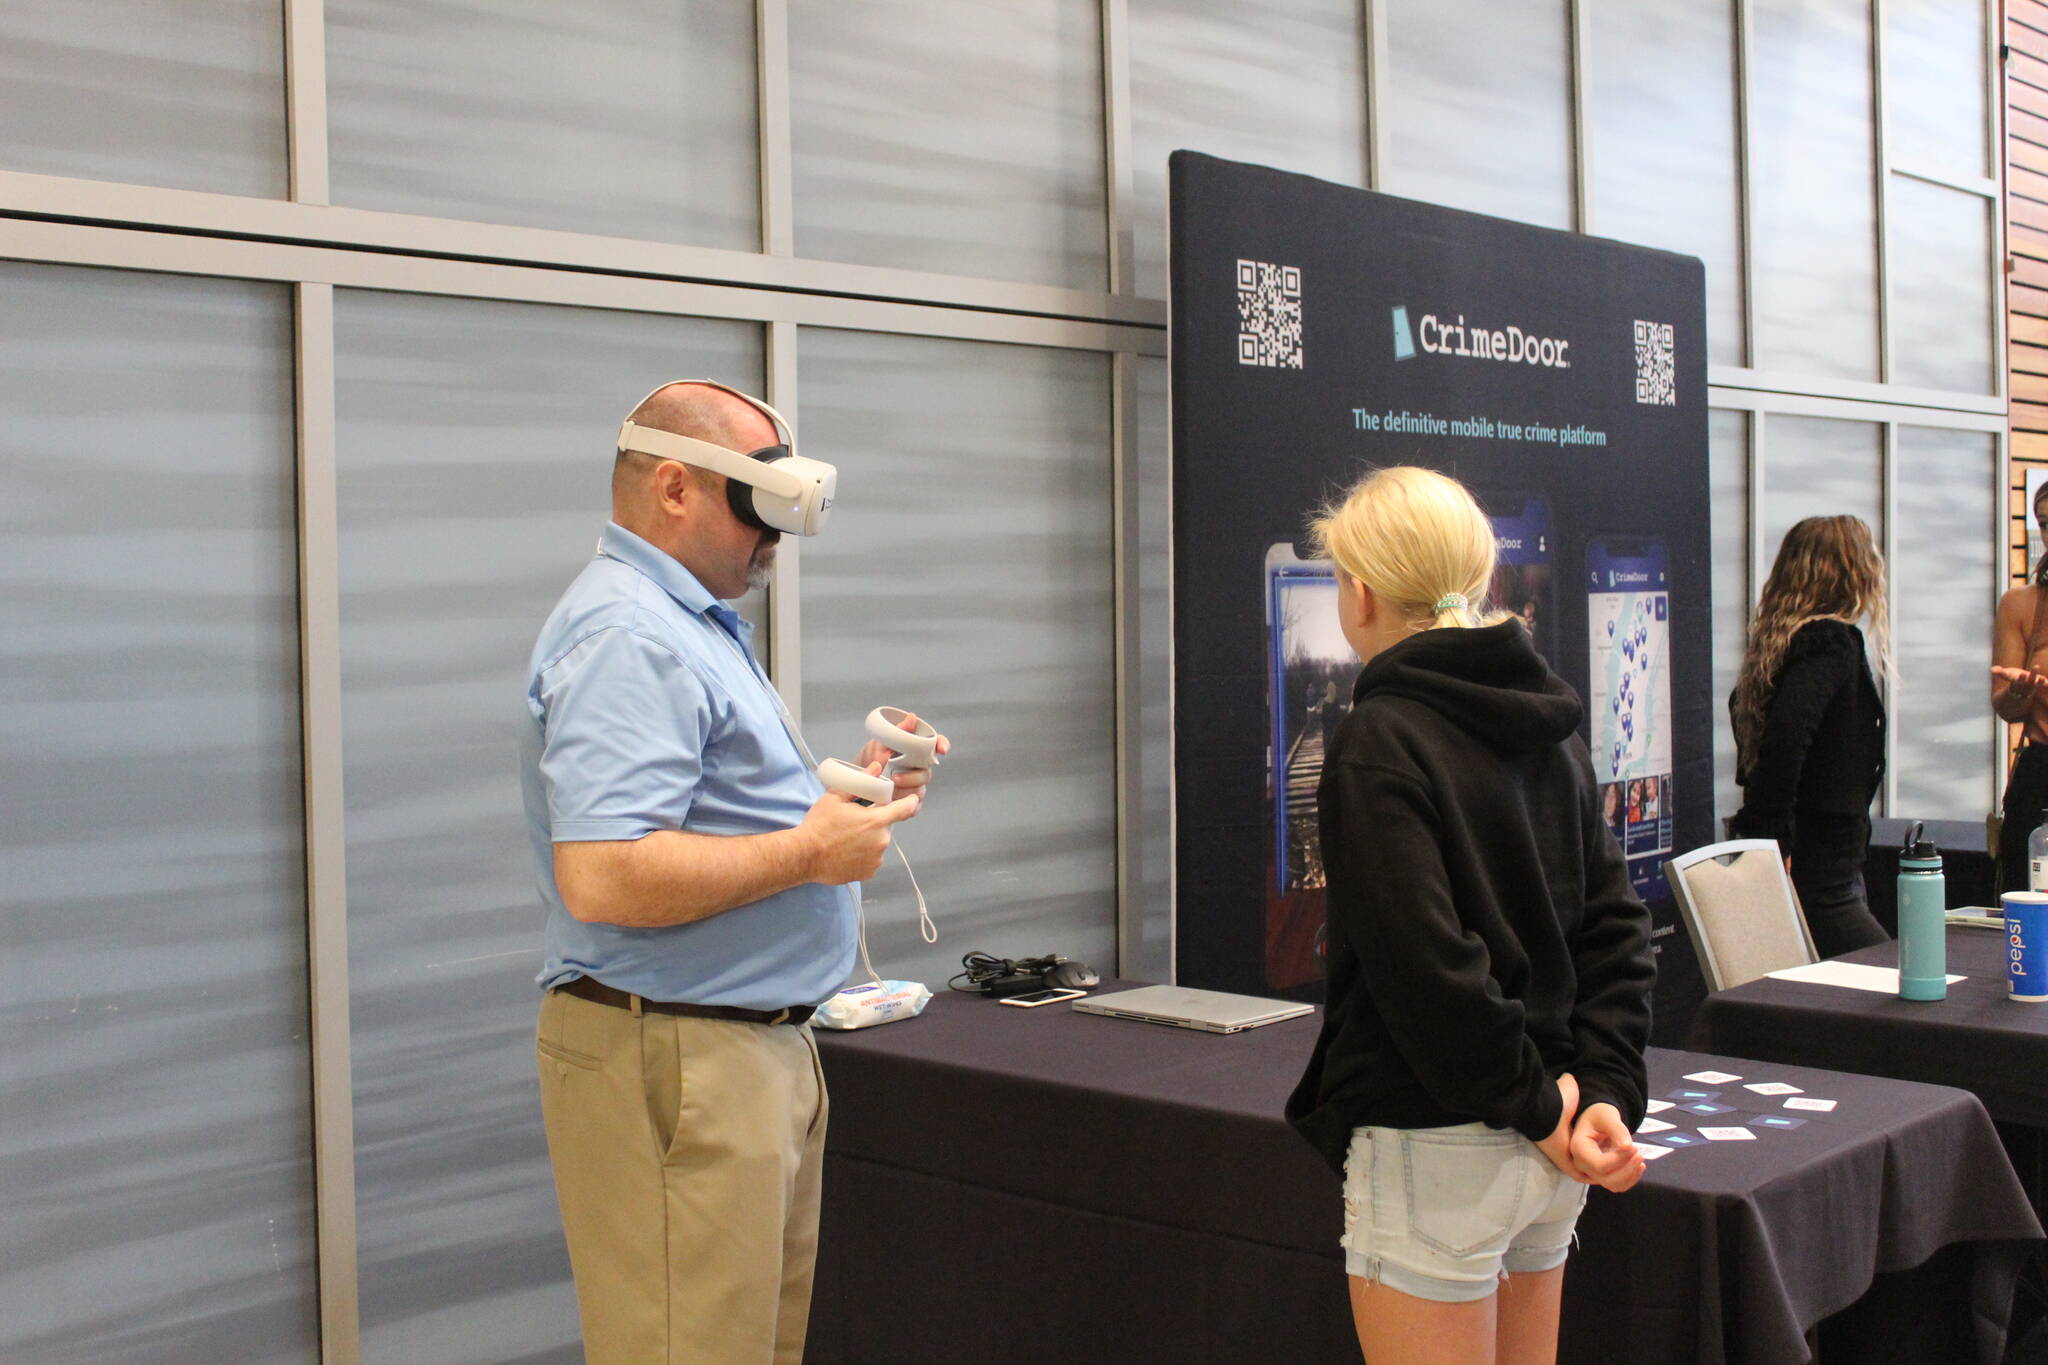 A guest is shown how to use augmented reality to explore the CrimeDoor app, a “definitive mobile true crime platform” that allows people to learn about and explore the sites and stories of true crime cases. Photo by Bailey Jo Josie/Sound Publishing.